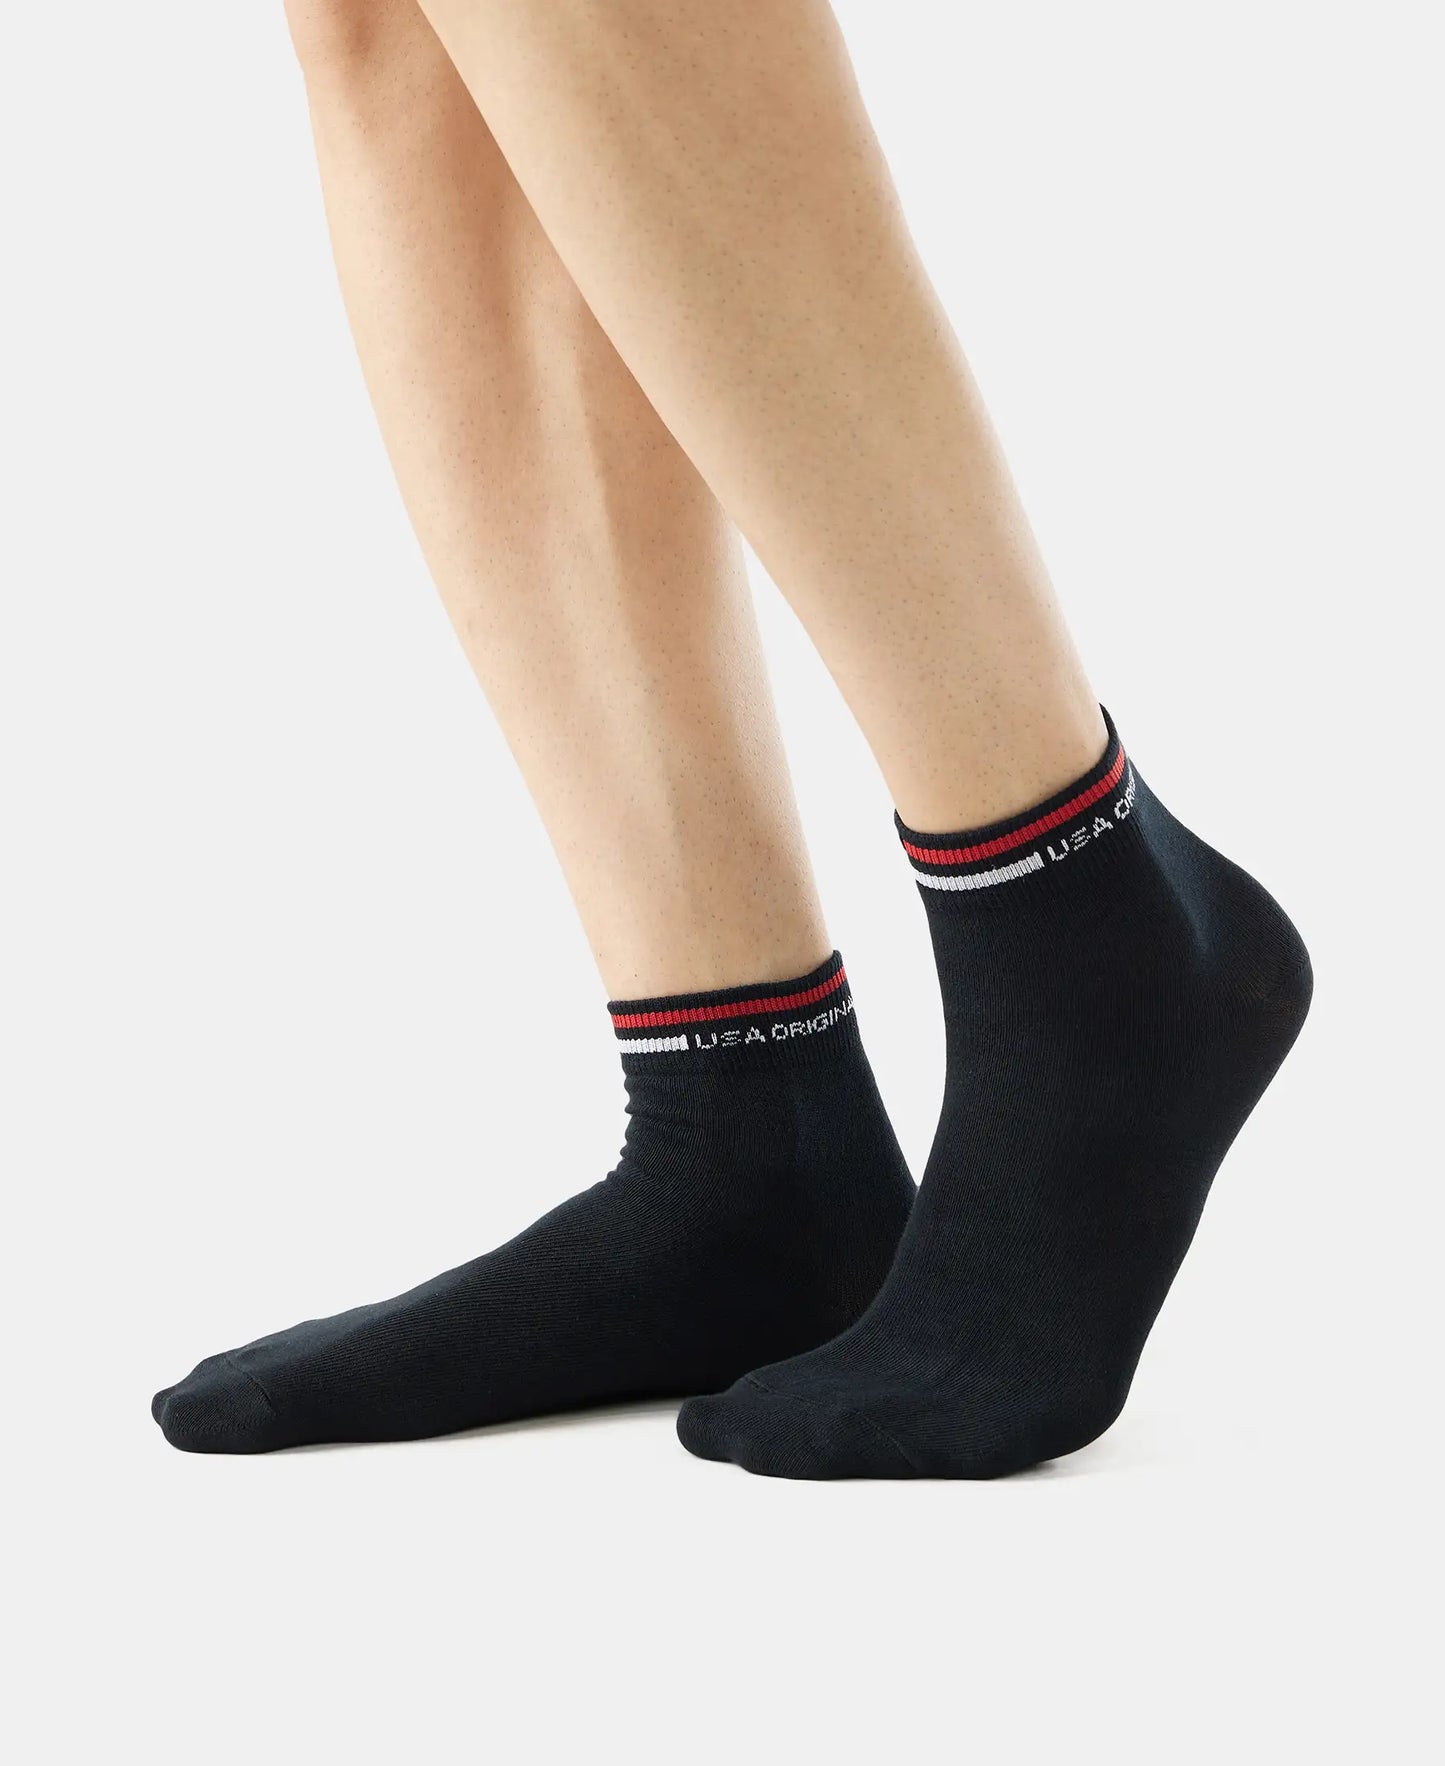 Compact Cotton Ankle Length Socks with StayFresh Treatment - Black-3